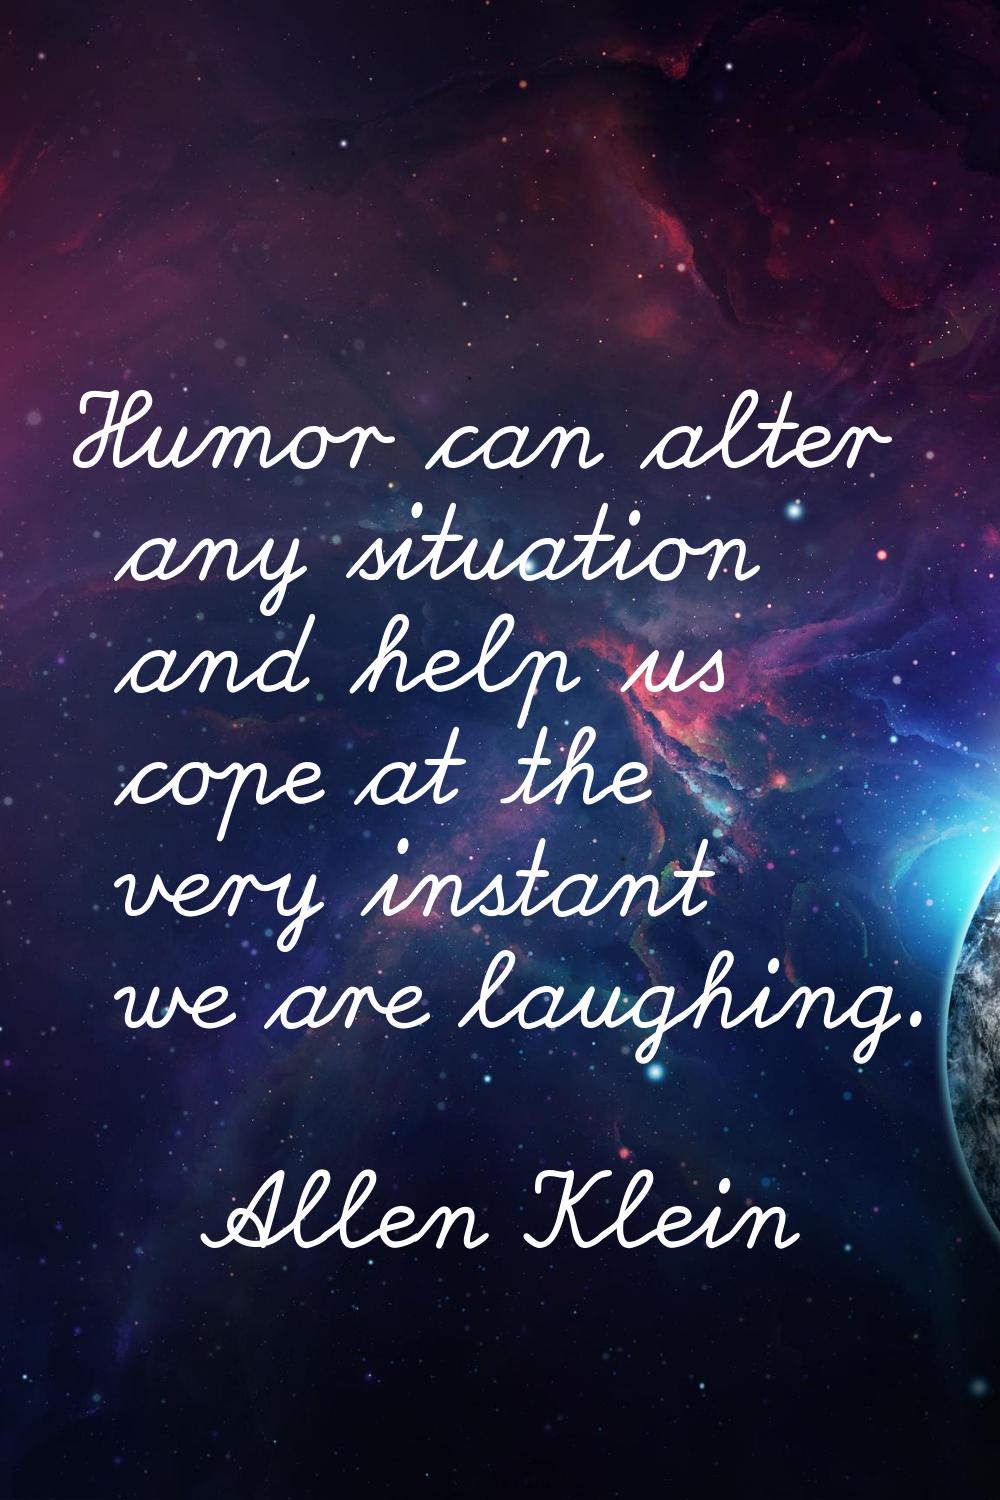 Humor can alter any situation and help us cope at the very instant we are laughing.